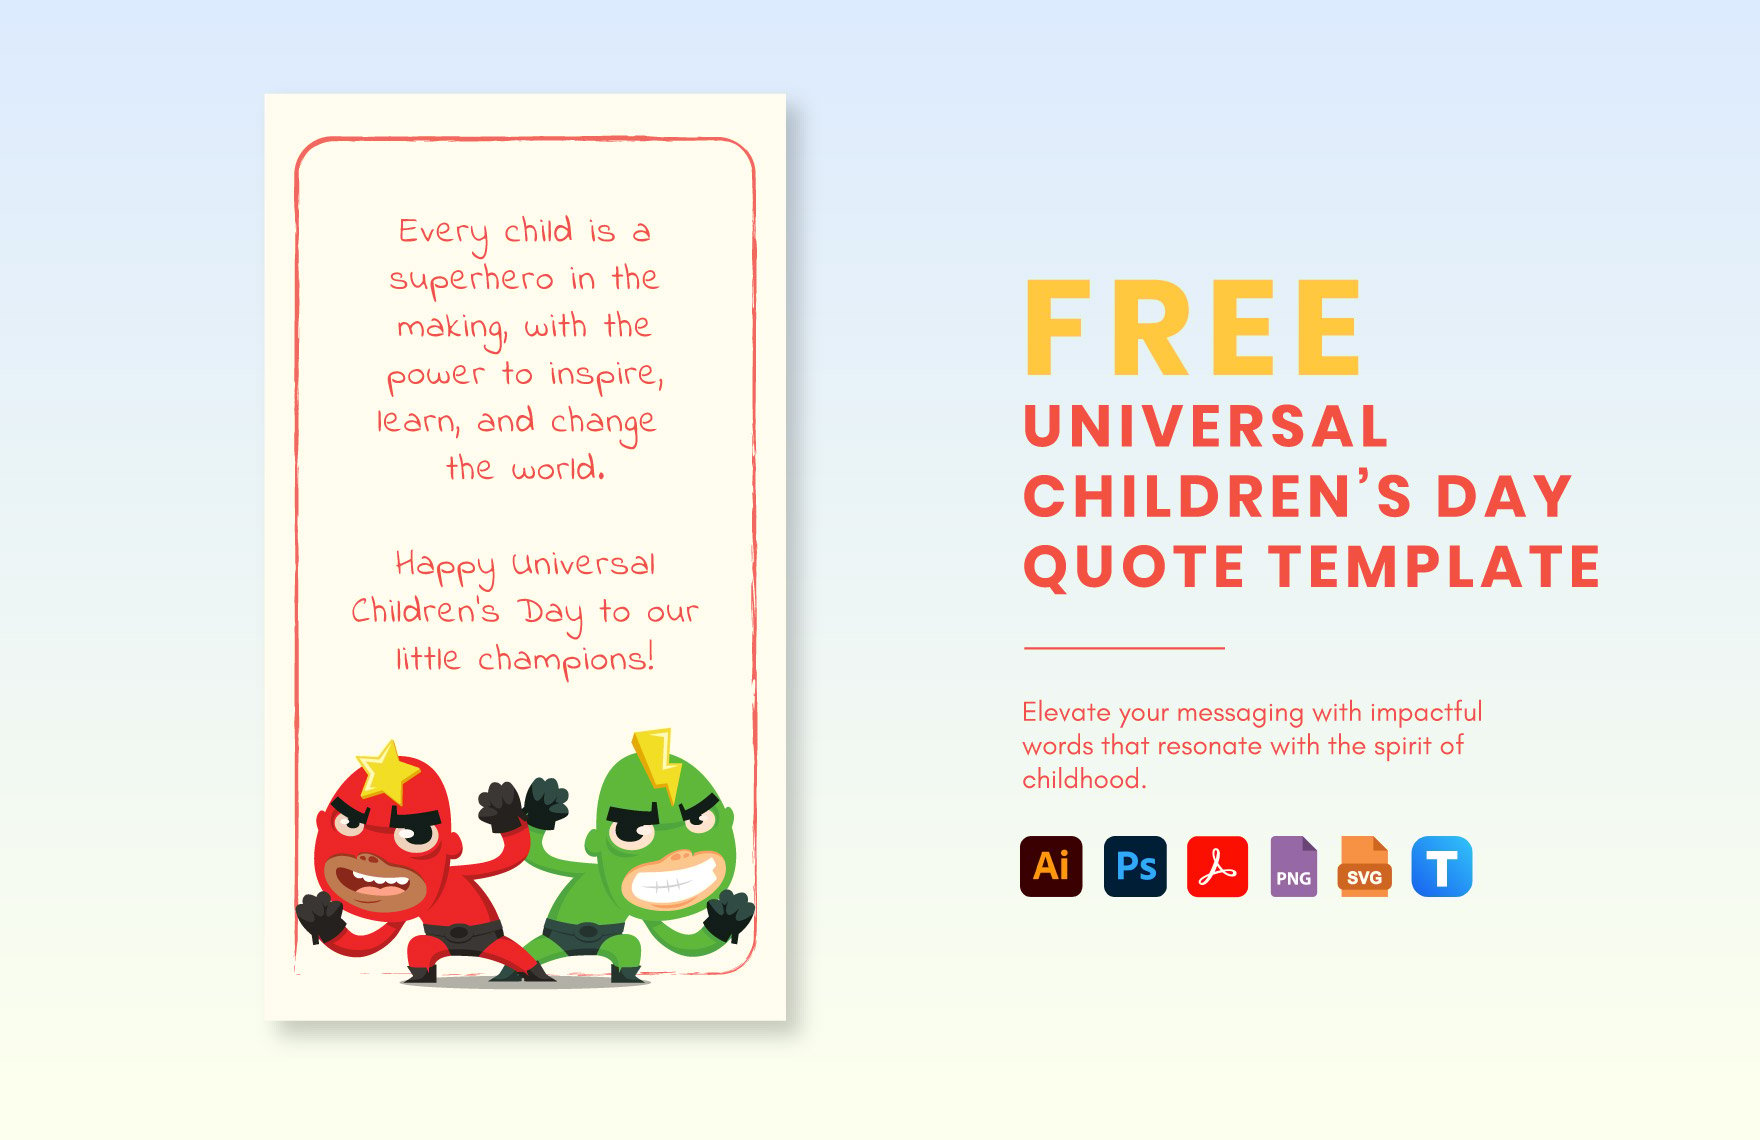 Free Universal Children’s Day Quote in PDF, Illustrator, PSD, SVG, PNG